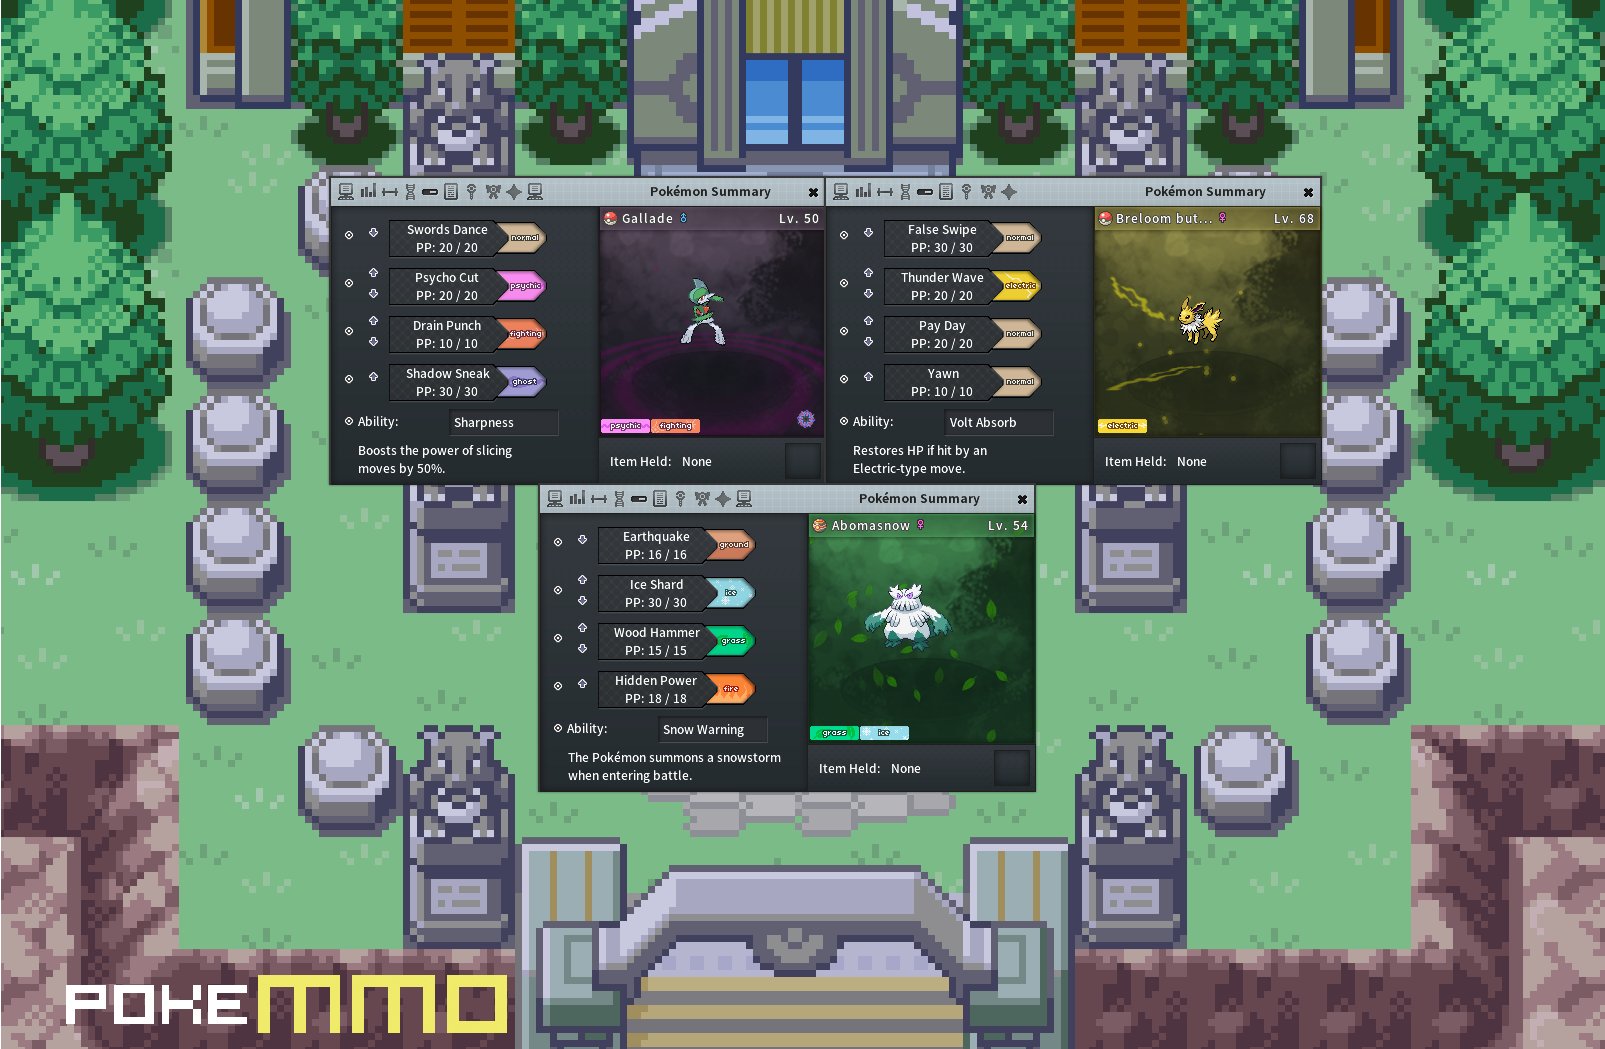 just completed kanto region in pokeMMO